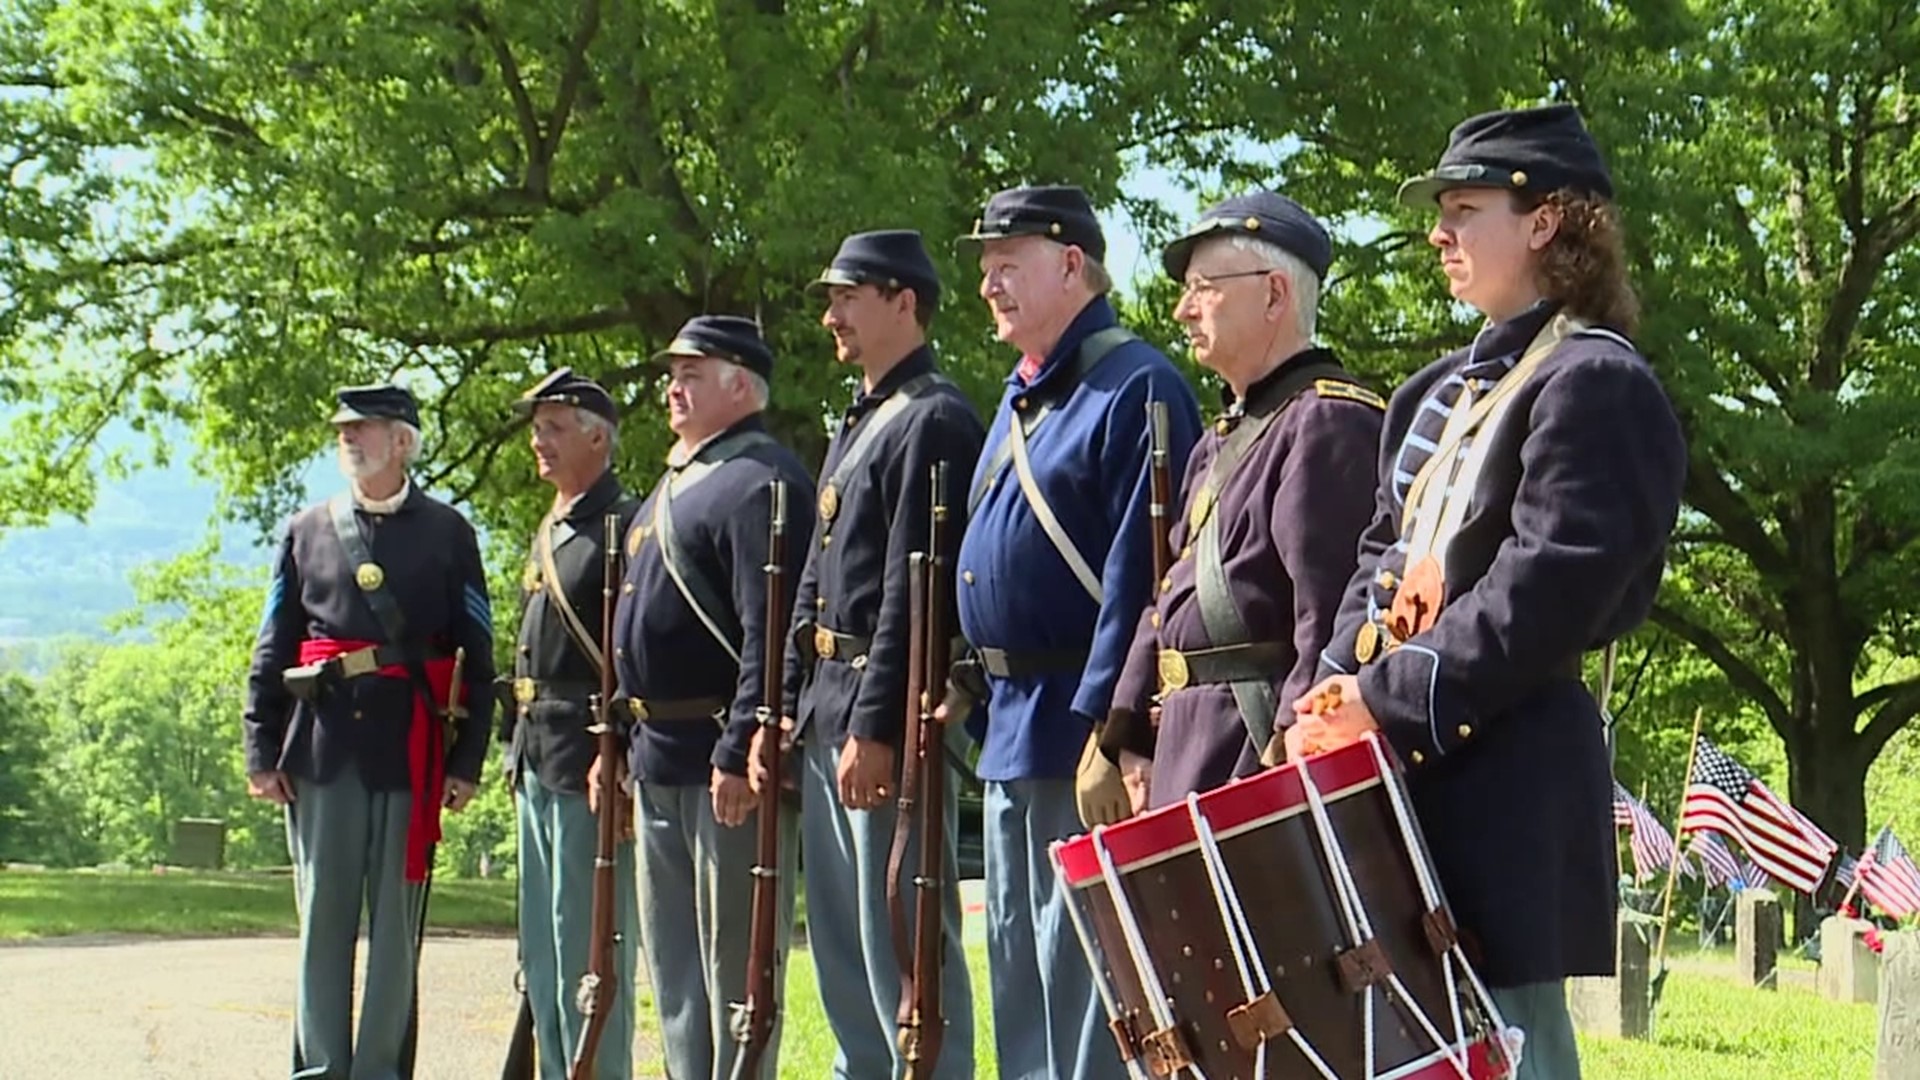 The 11th Pennsylvania Volunteer Infantry honored the more than 150 Civil War veterans buried at Wildwood Cemetery in Williamsport.